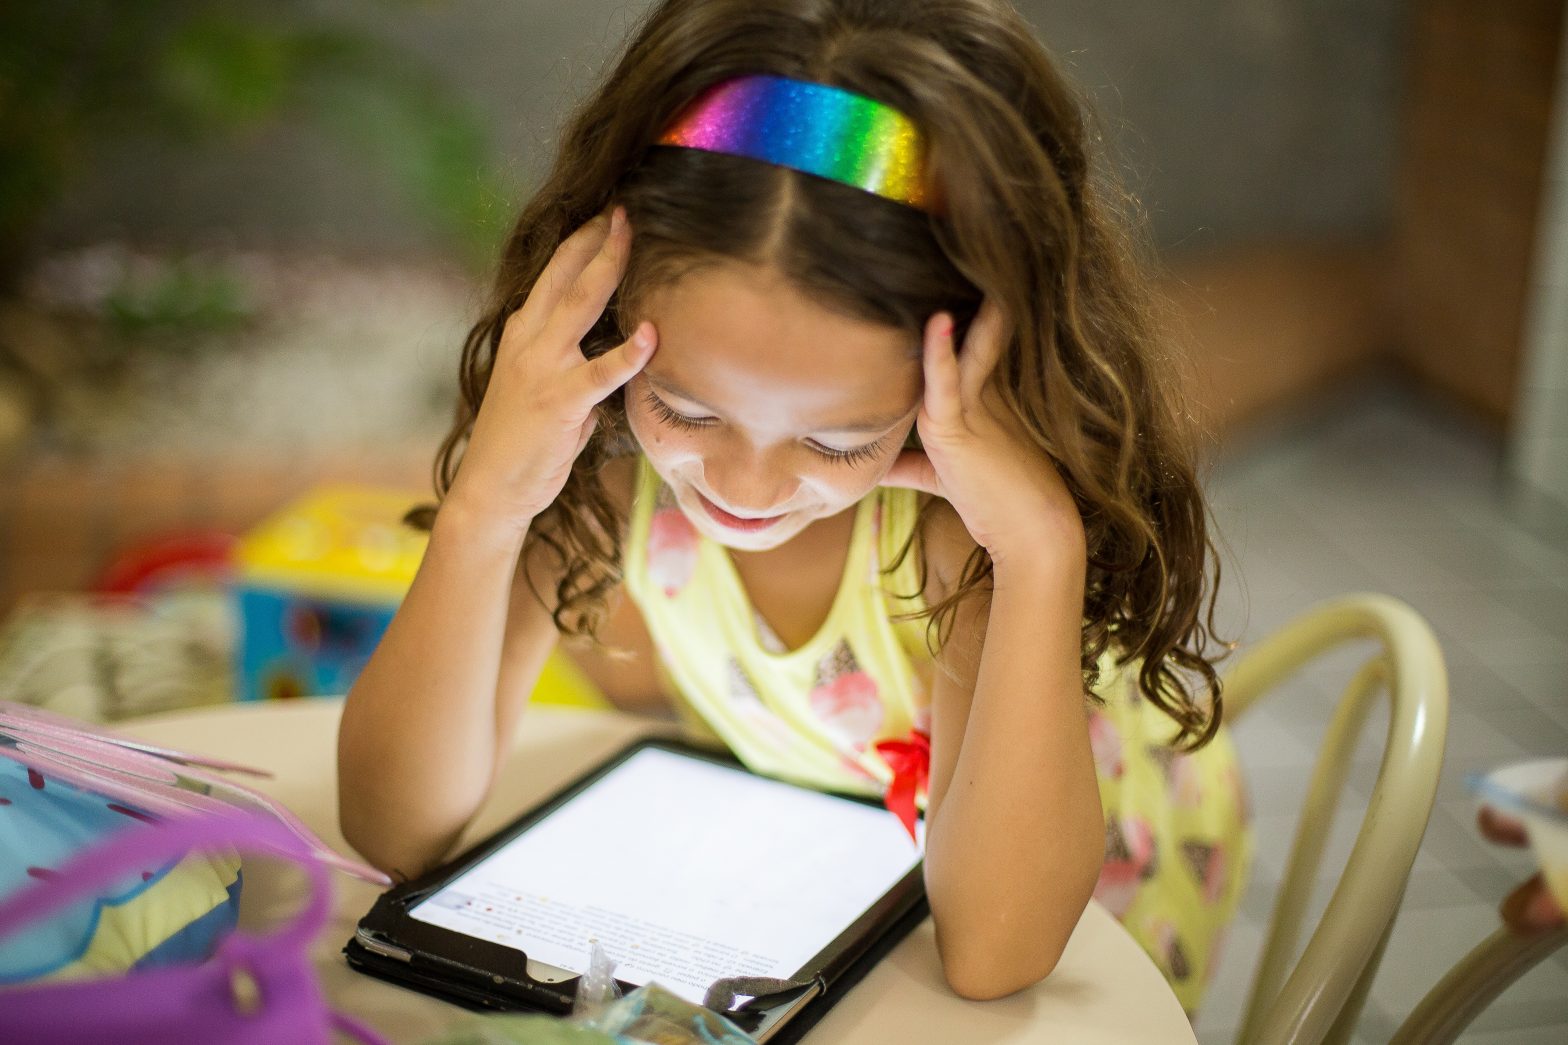 How Do I Limit My Child’s Screen Time?